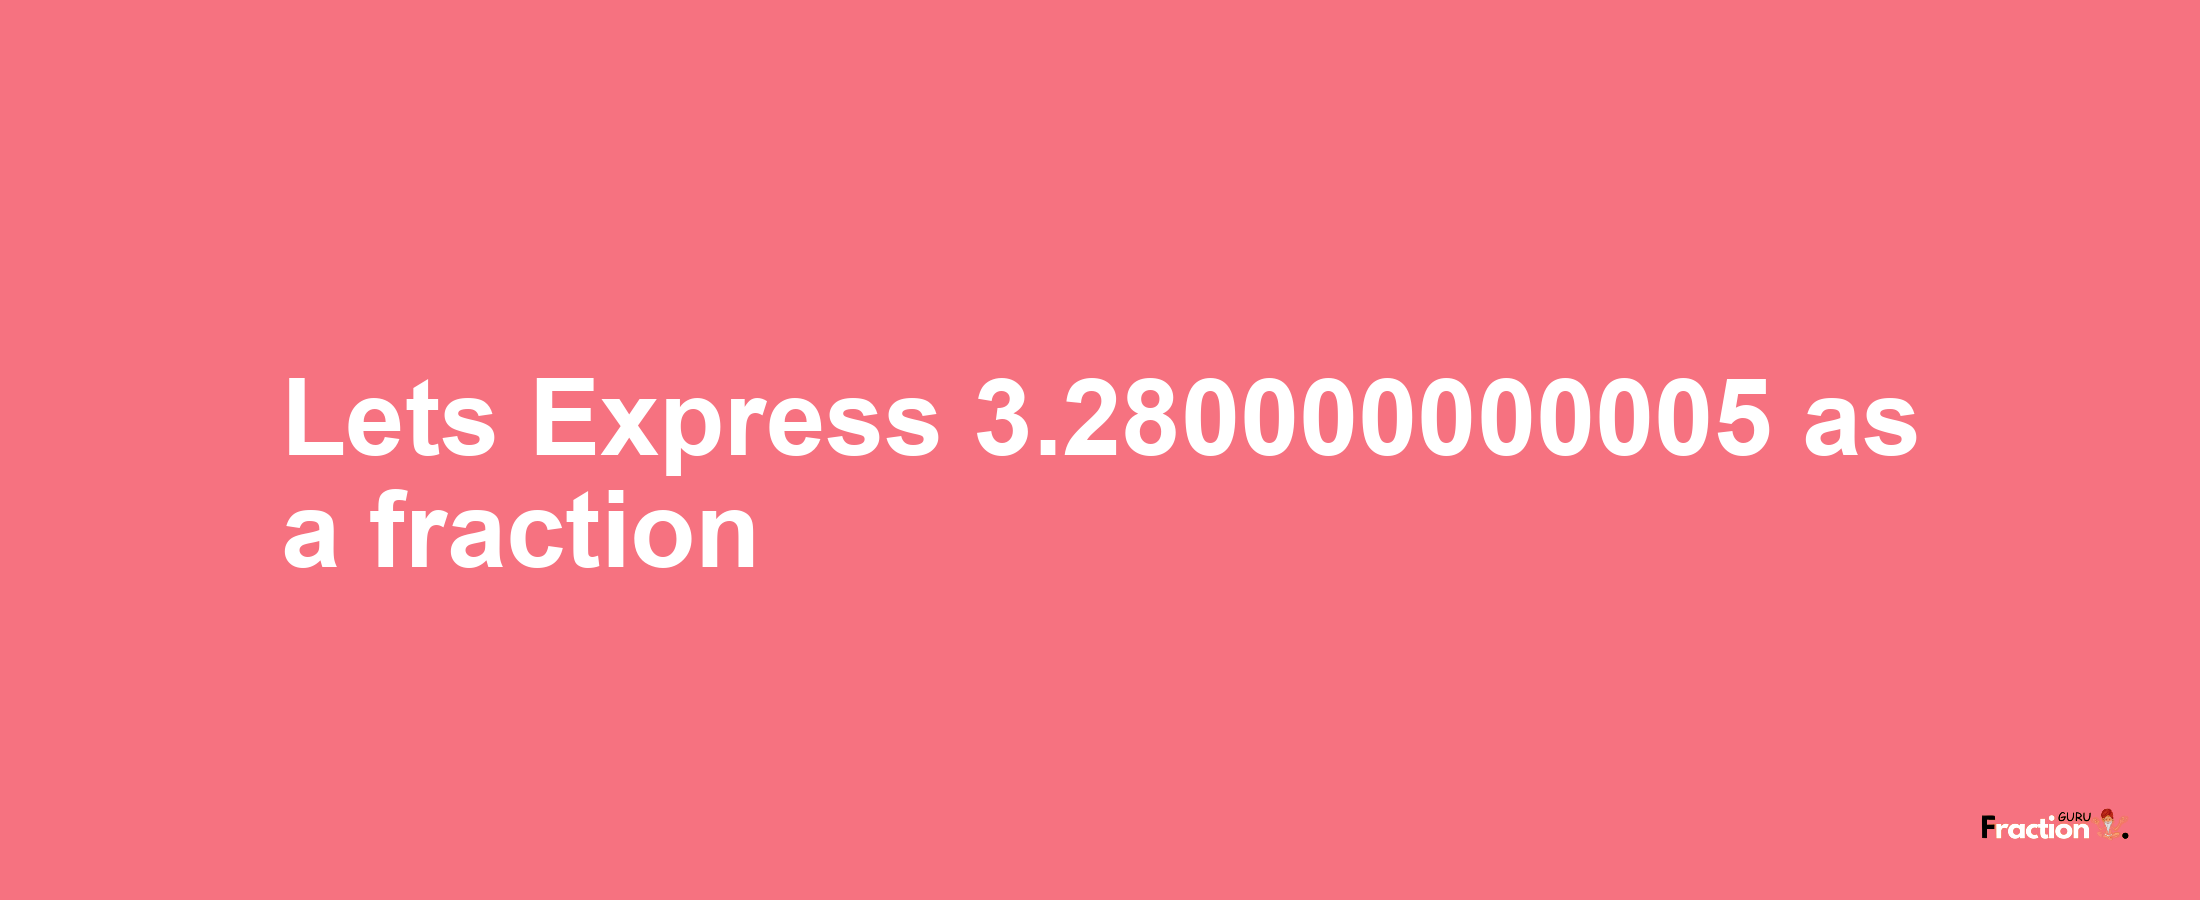 Lets Express 3.280000000005 as afraction